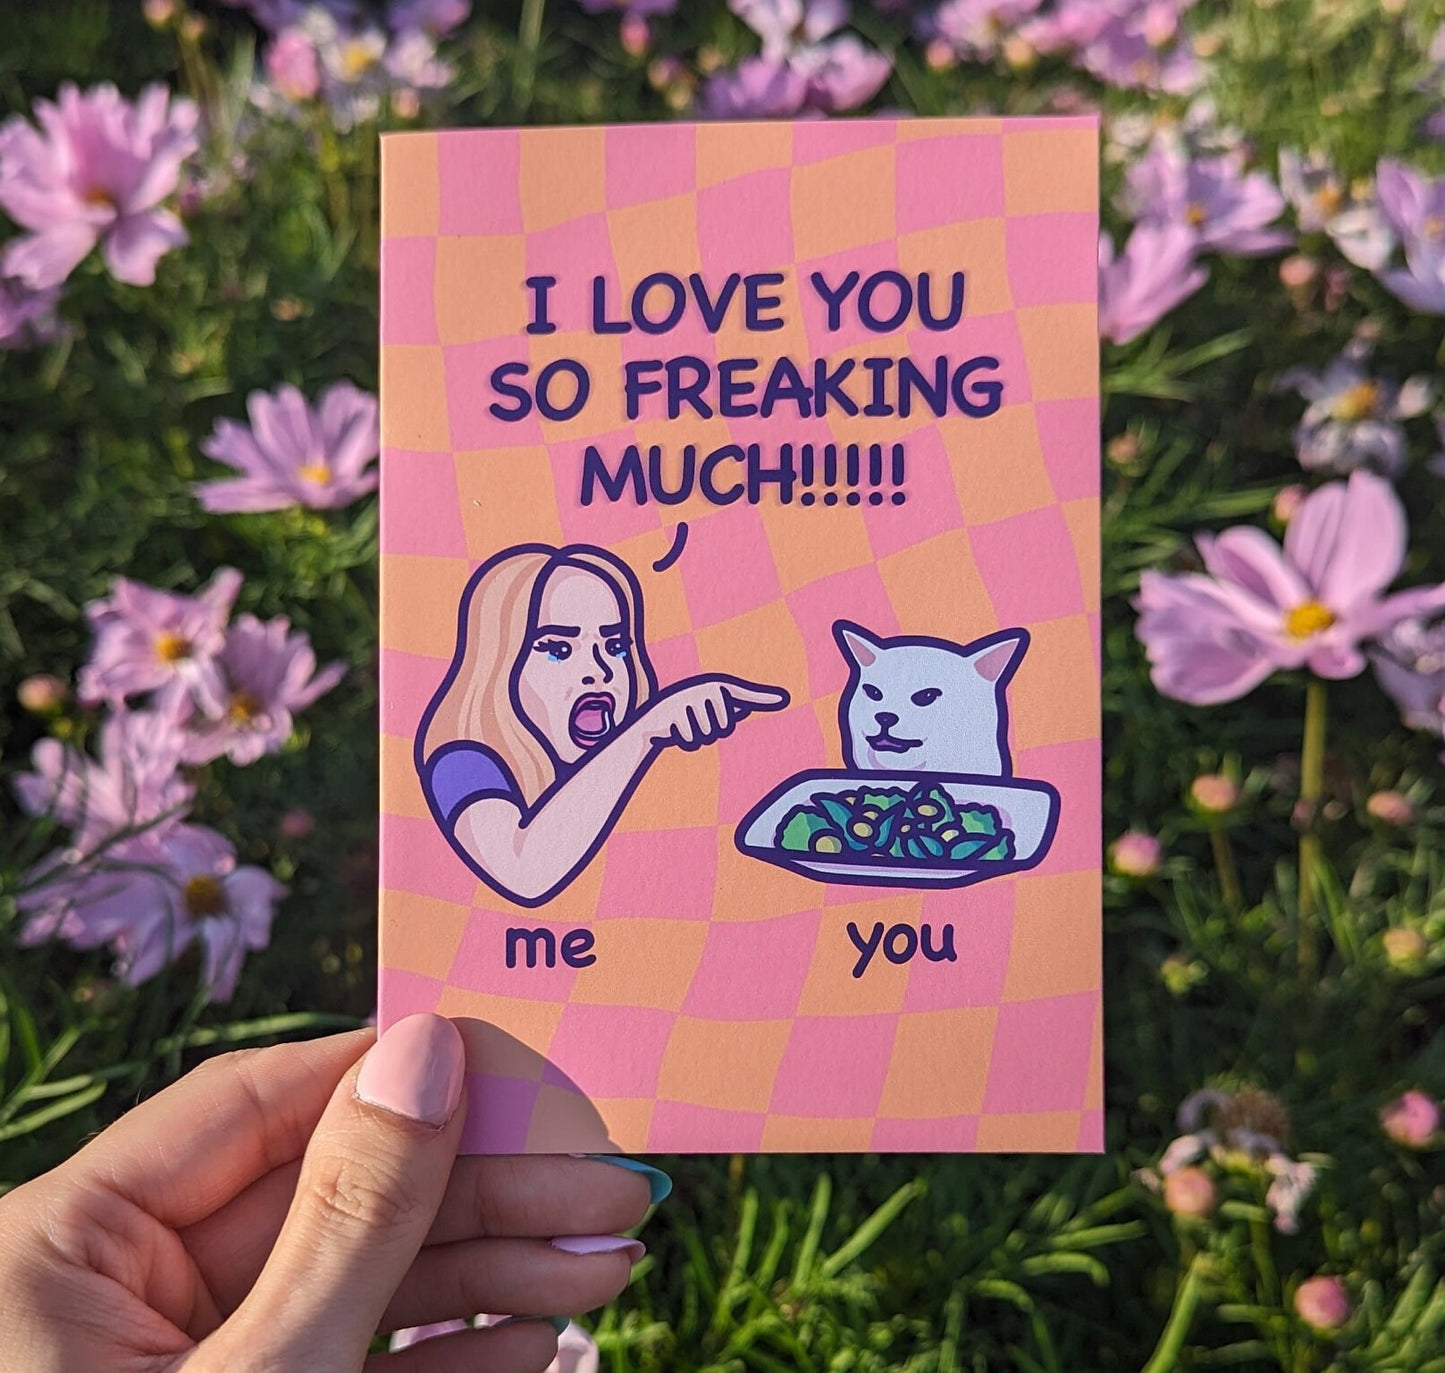 Funny Cat Meme Anniversary Card | I Love You So Freaking Much! | Woman Yelling at Cat Meme | For Boyfriend, Husband, Wife - Her or Him